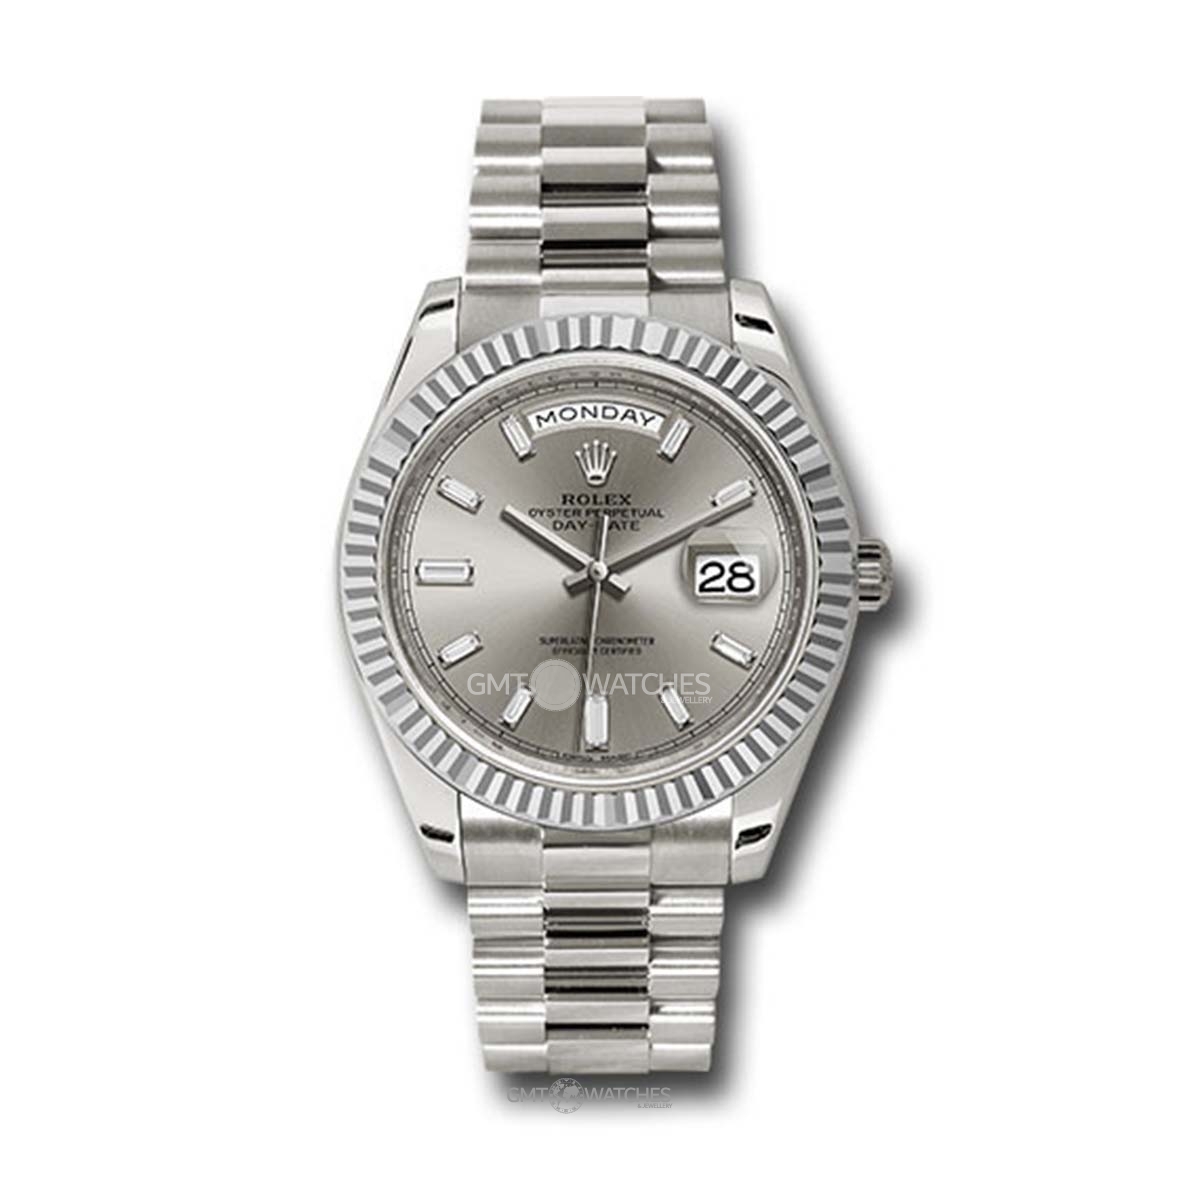 Rolex Oyster Perpetual Day-Date 40mm 18k White Gold 228239 sbdp